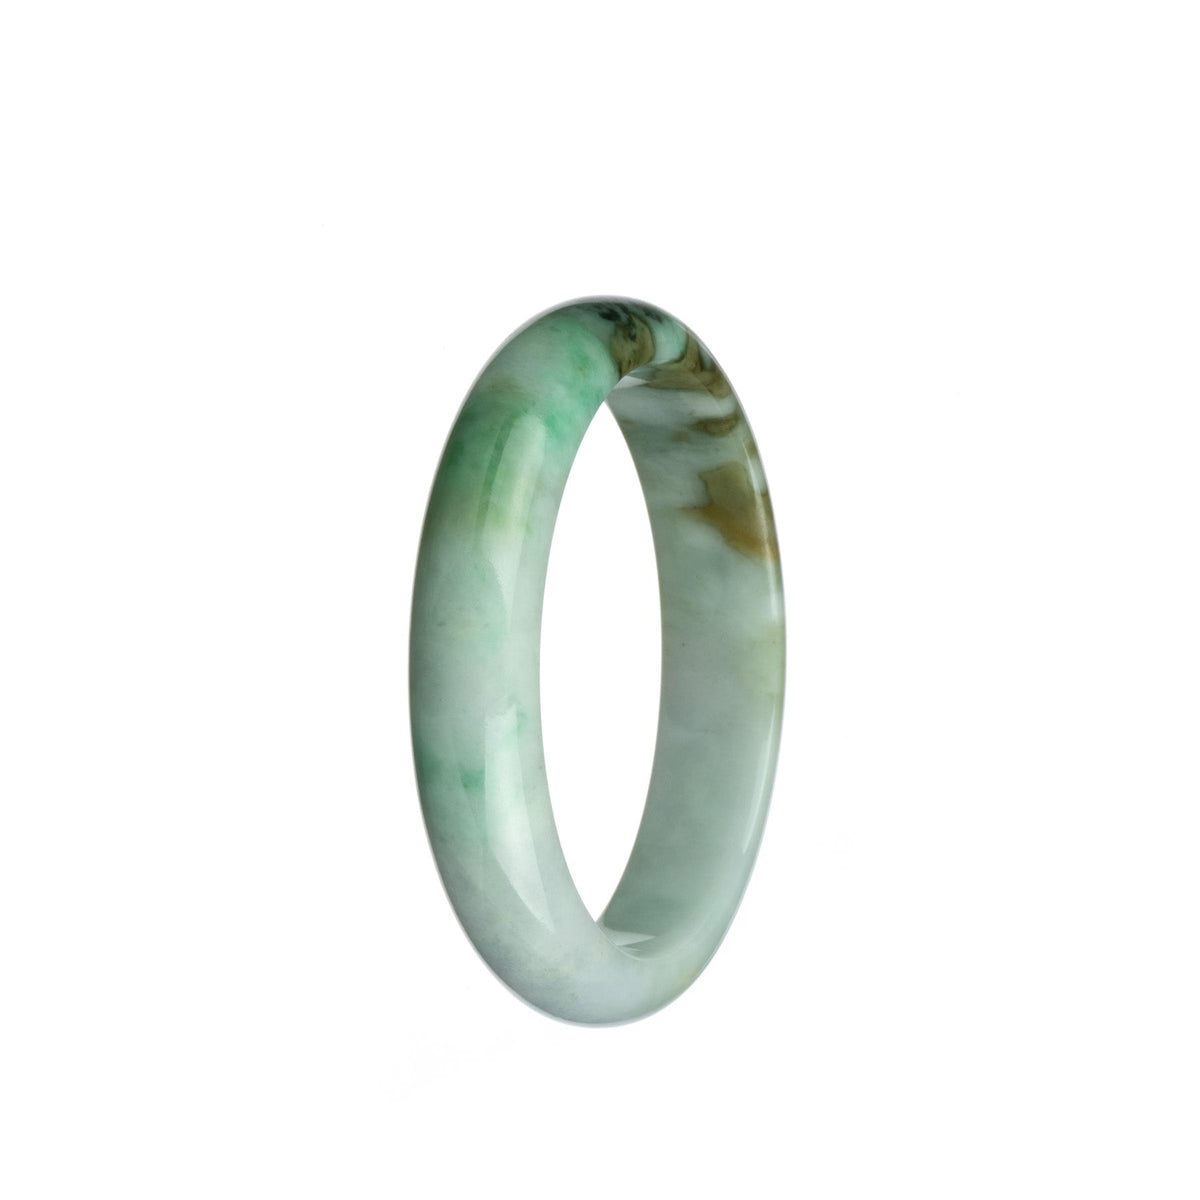 A beautiful bracelet made of genuine Burma jade, featuring a vibrant apple green and brown pattern on a white background. The bracelet is in a half moon shape, measuring 54mm in size. Crafted with care by MAYS™.